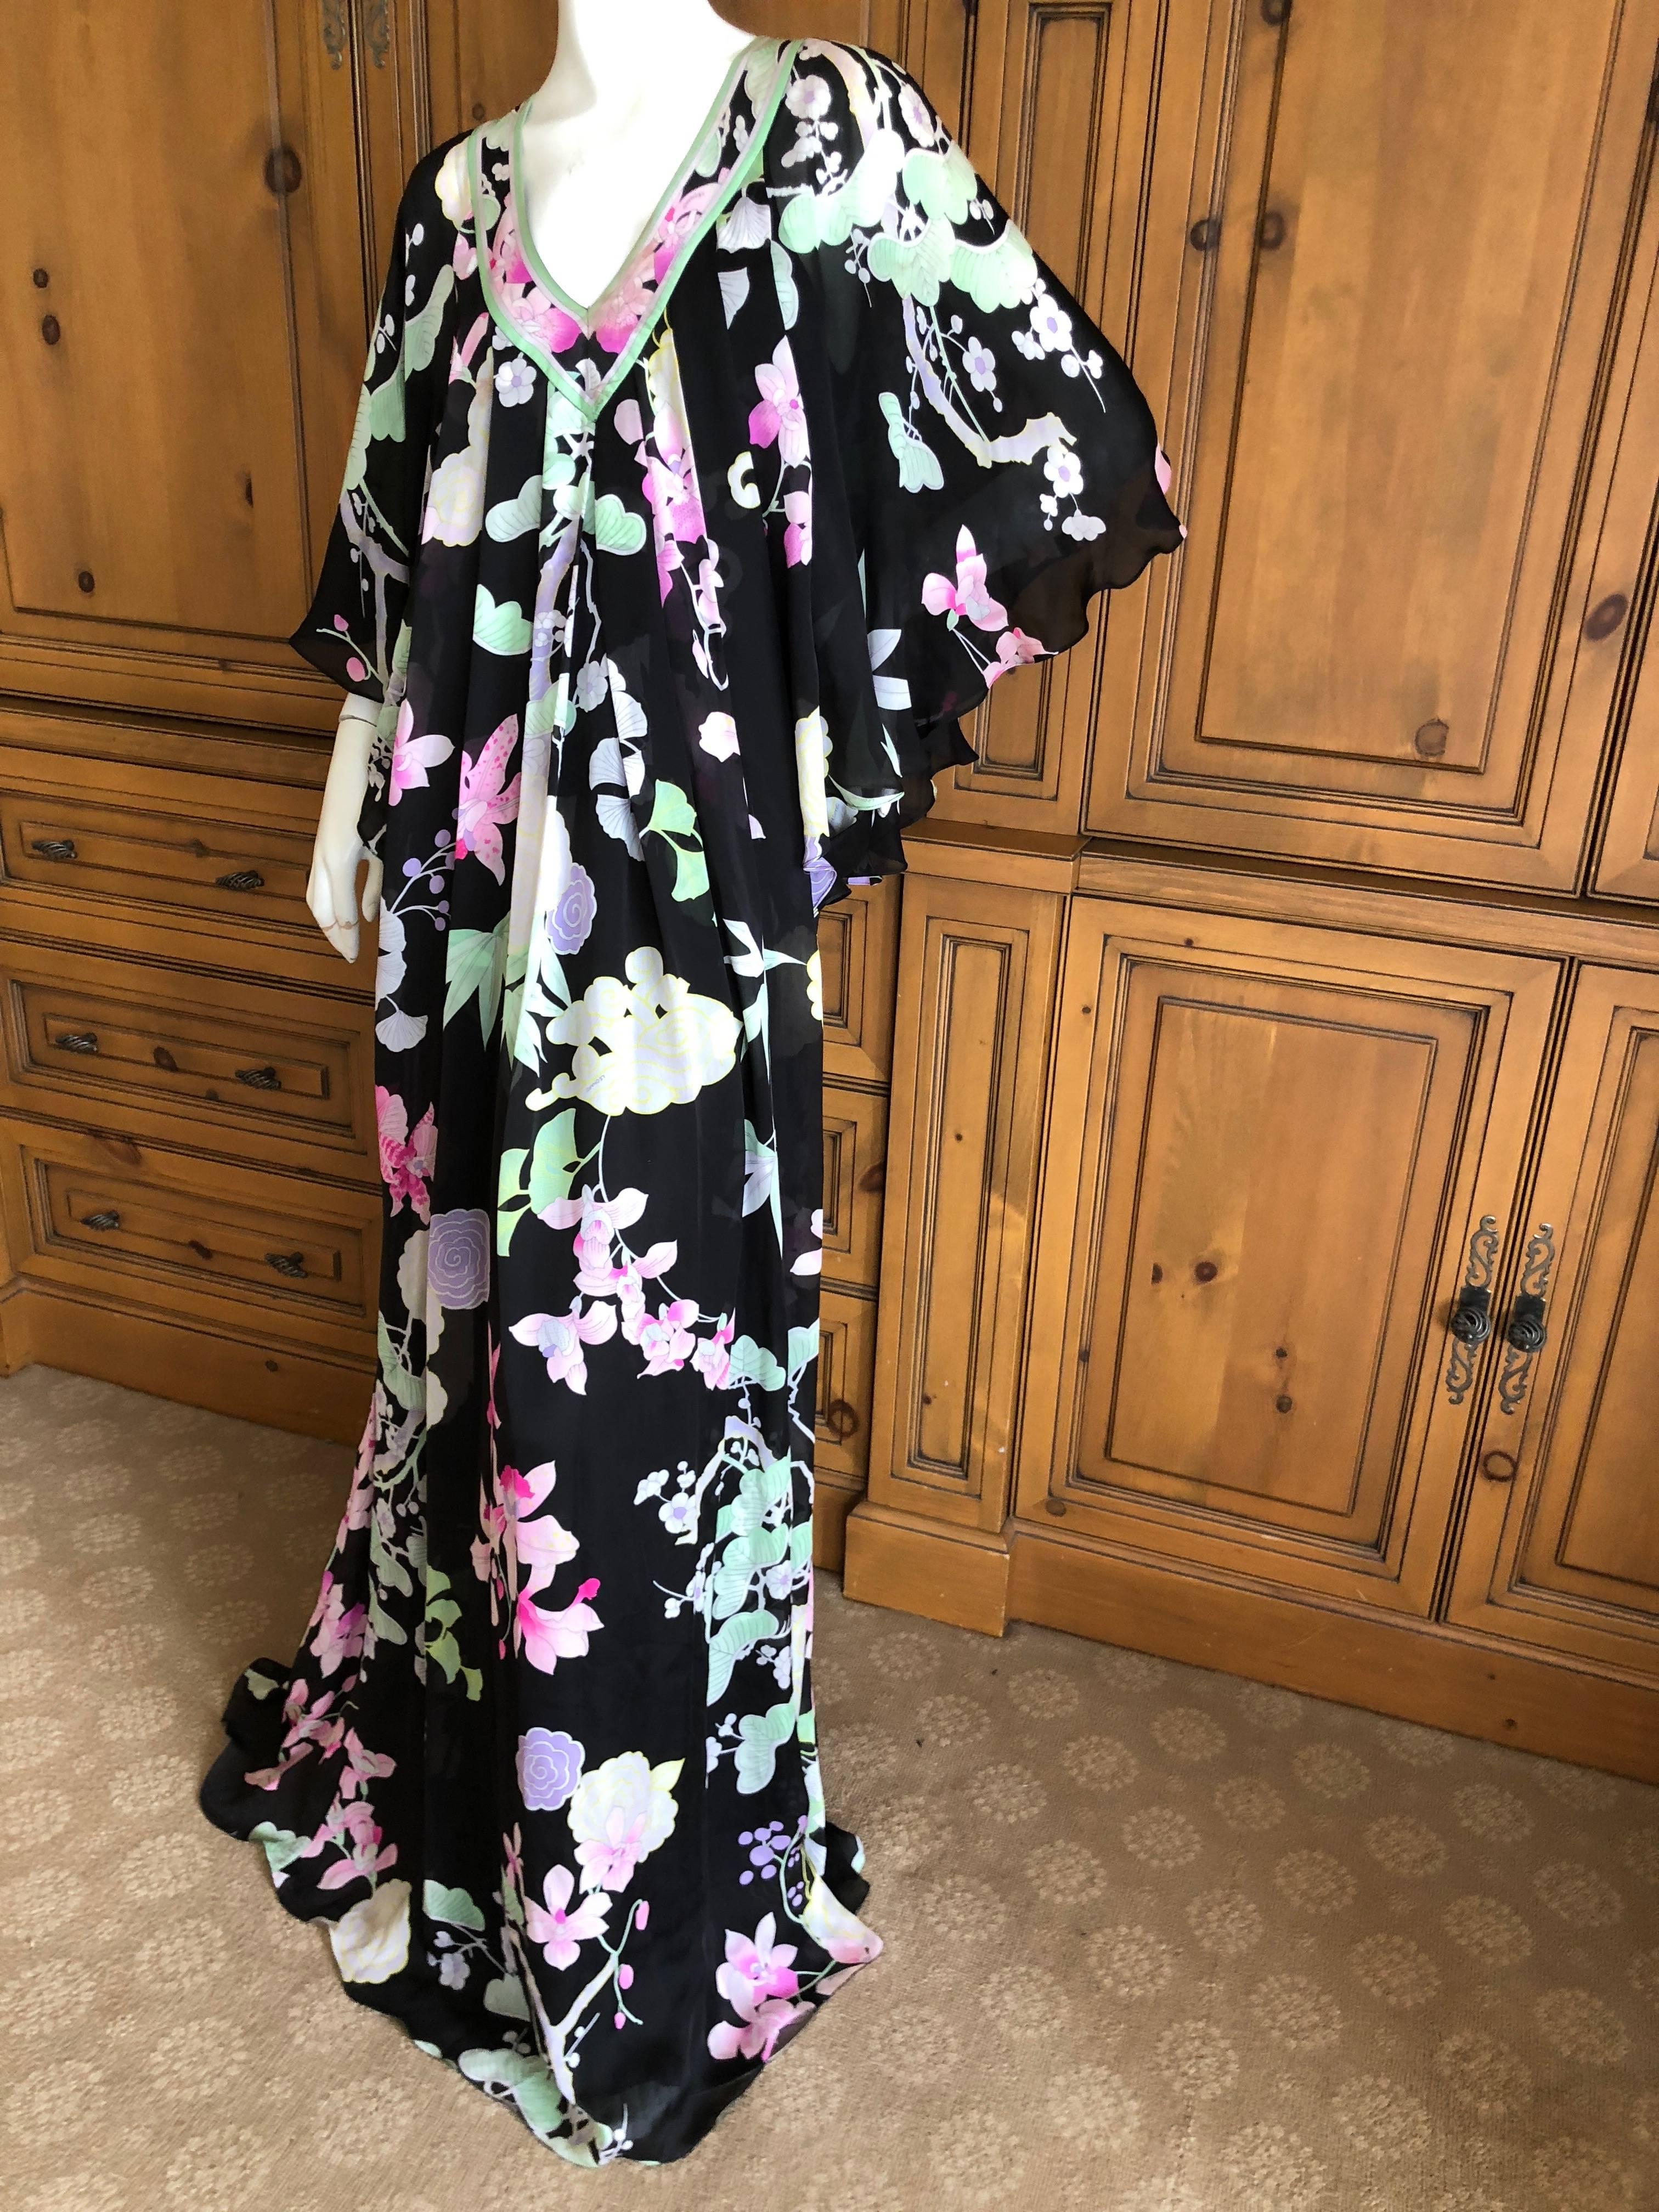 Leonard Paris Vintage Cape Back Caftan Dress
Leonard Paris was a contemporary of Pucci, both houses creating brilliant 60's patterns on silk jersey.
 Both were very expensive, and carried in the best stores internationally.

Size M
Bust 42